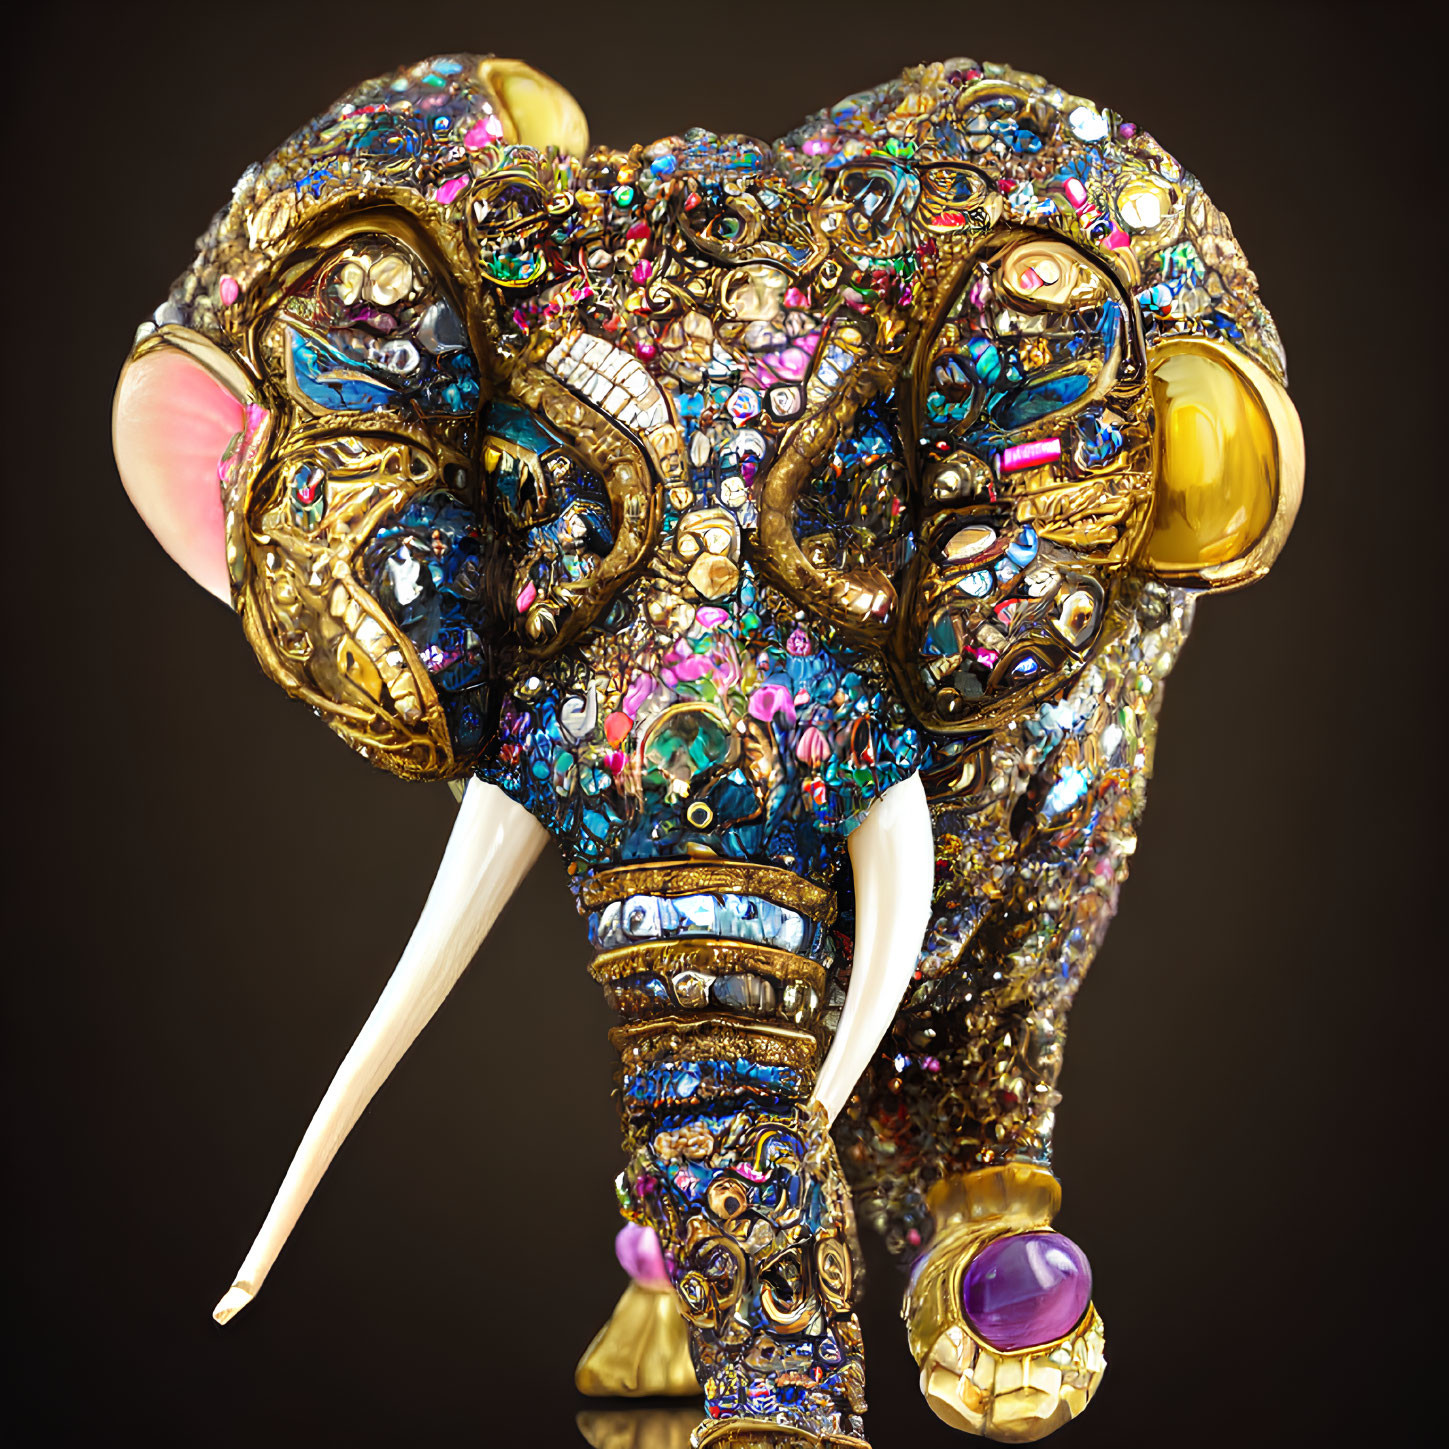 Jeweled Elephant Head Sculpture with Sparkling Stones and Intricate Metalwork